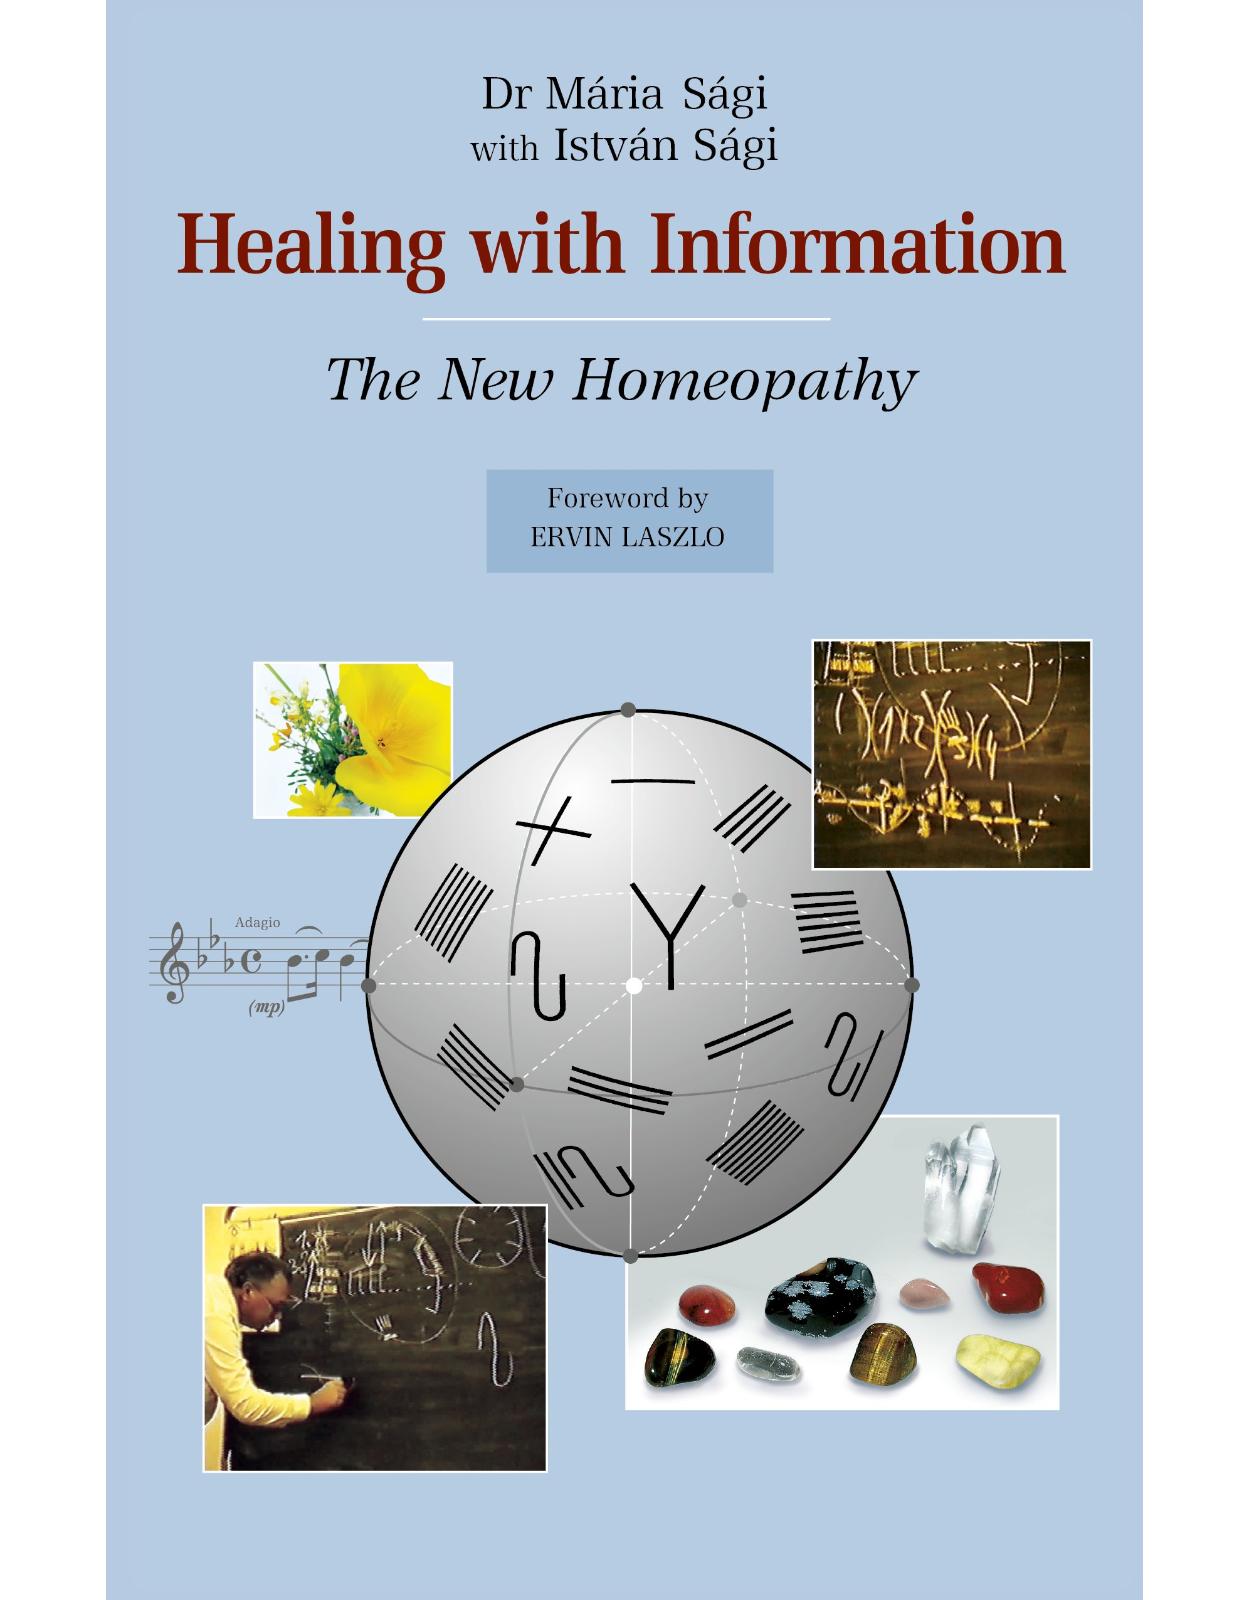 Healing with Information: The new homeopathy